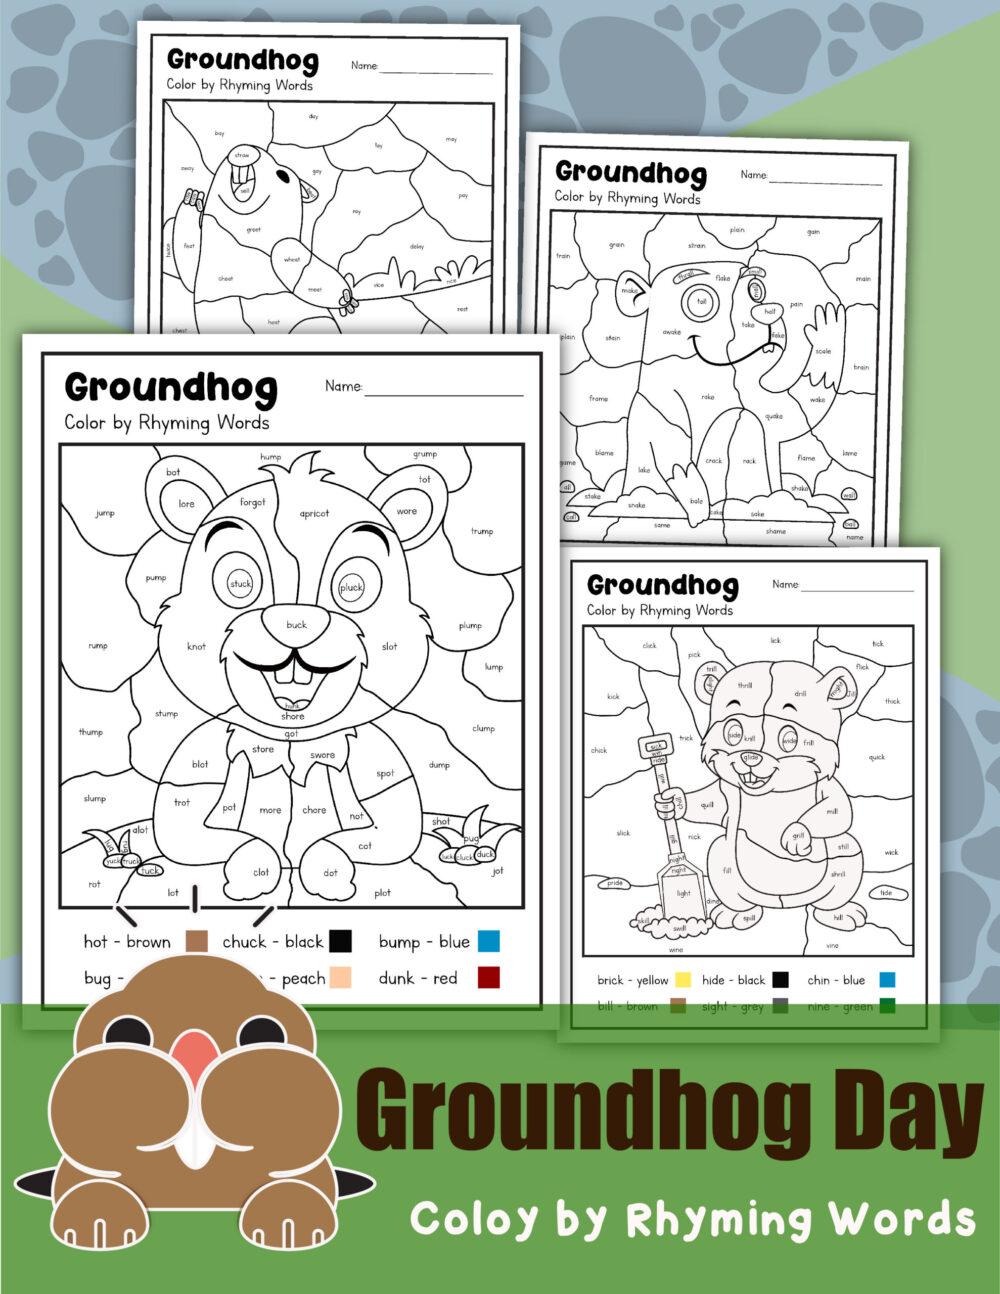 8 Groundhog Day Coloring Pages Using Rhyming Words